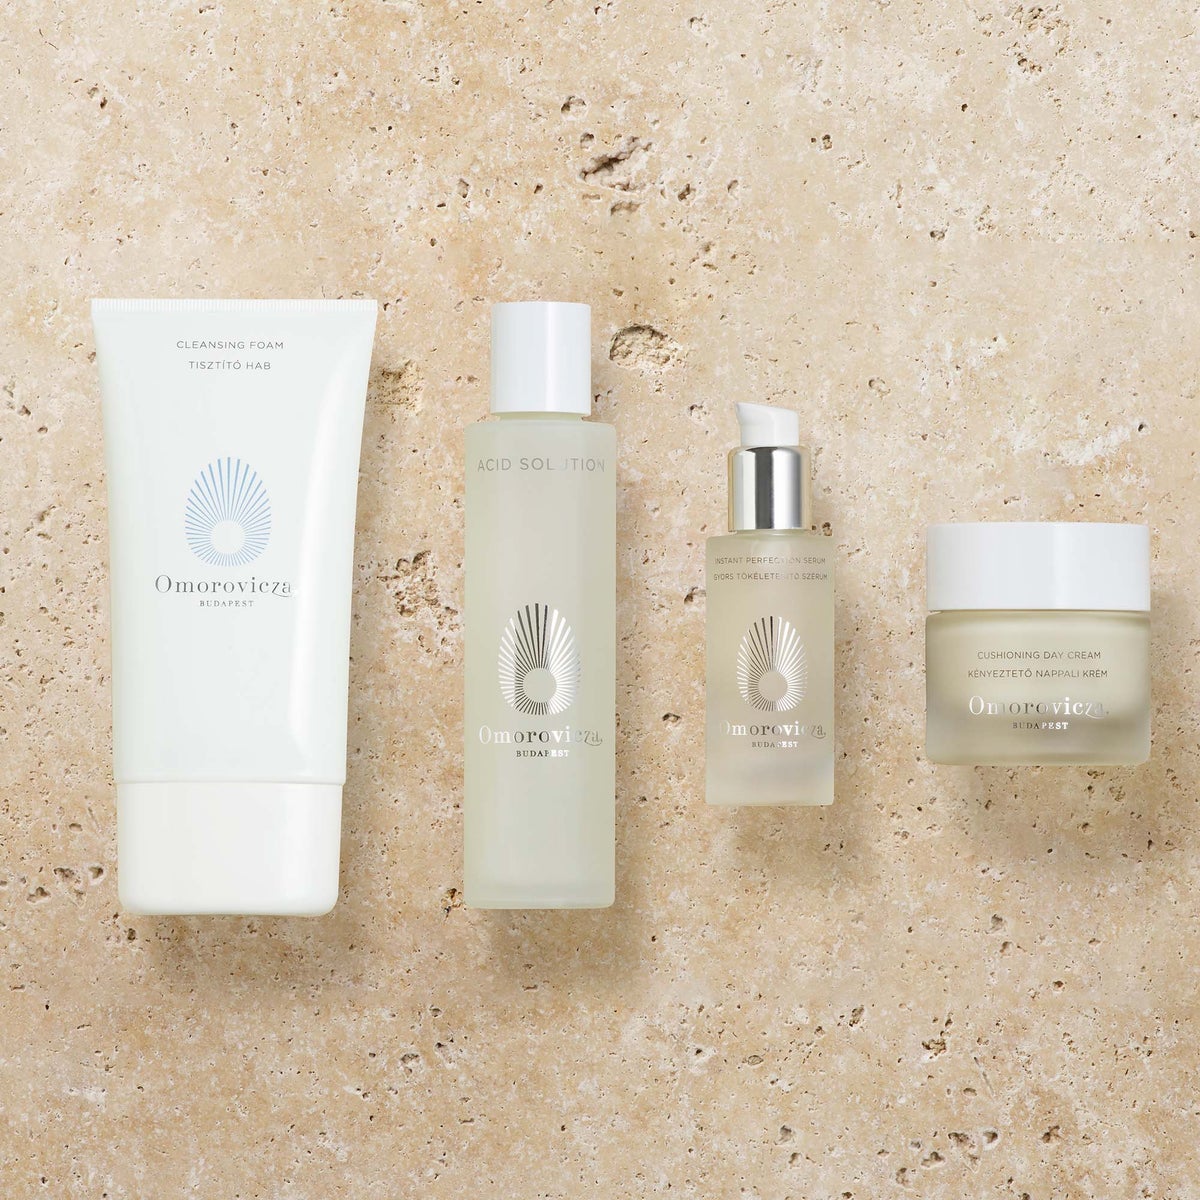 CUSHIONING DAY CREAM, acid solution, instant perfection serum, cleansing foam